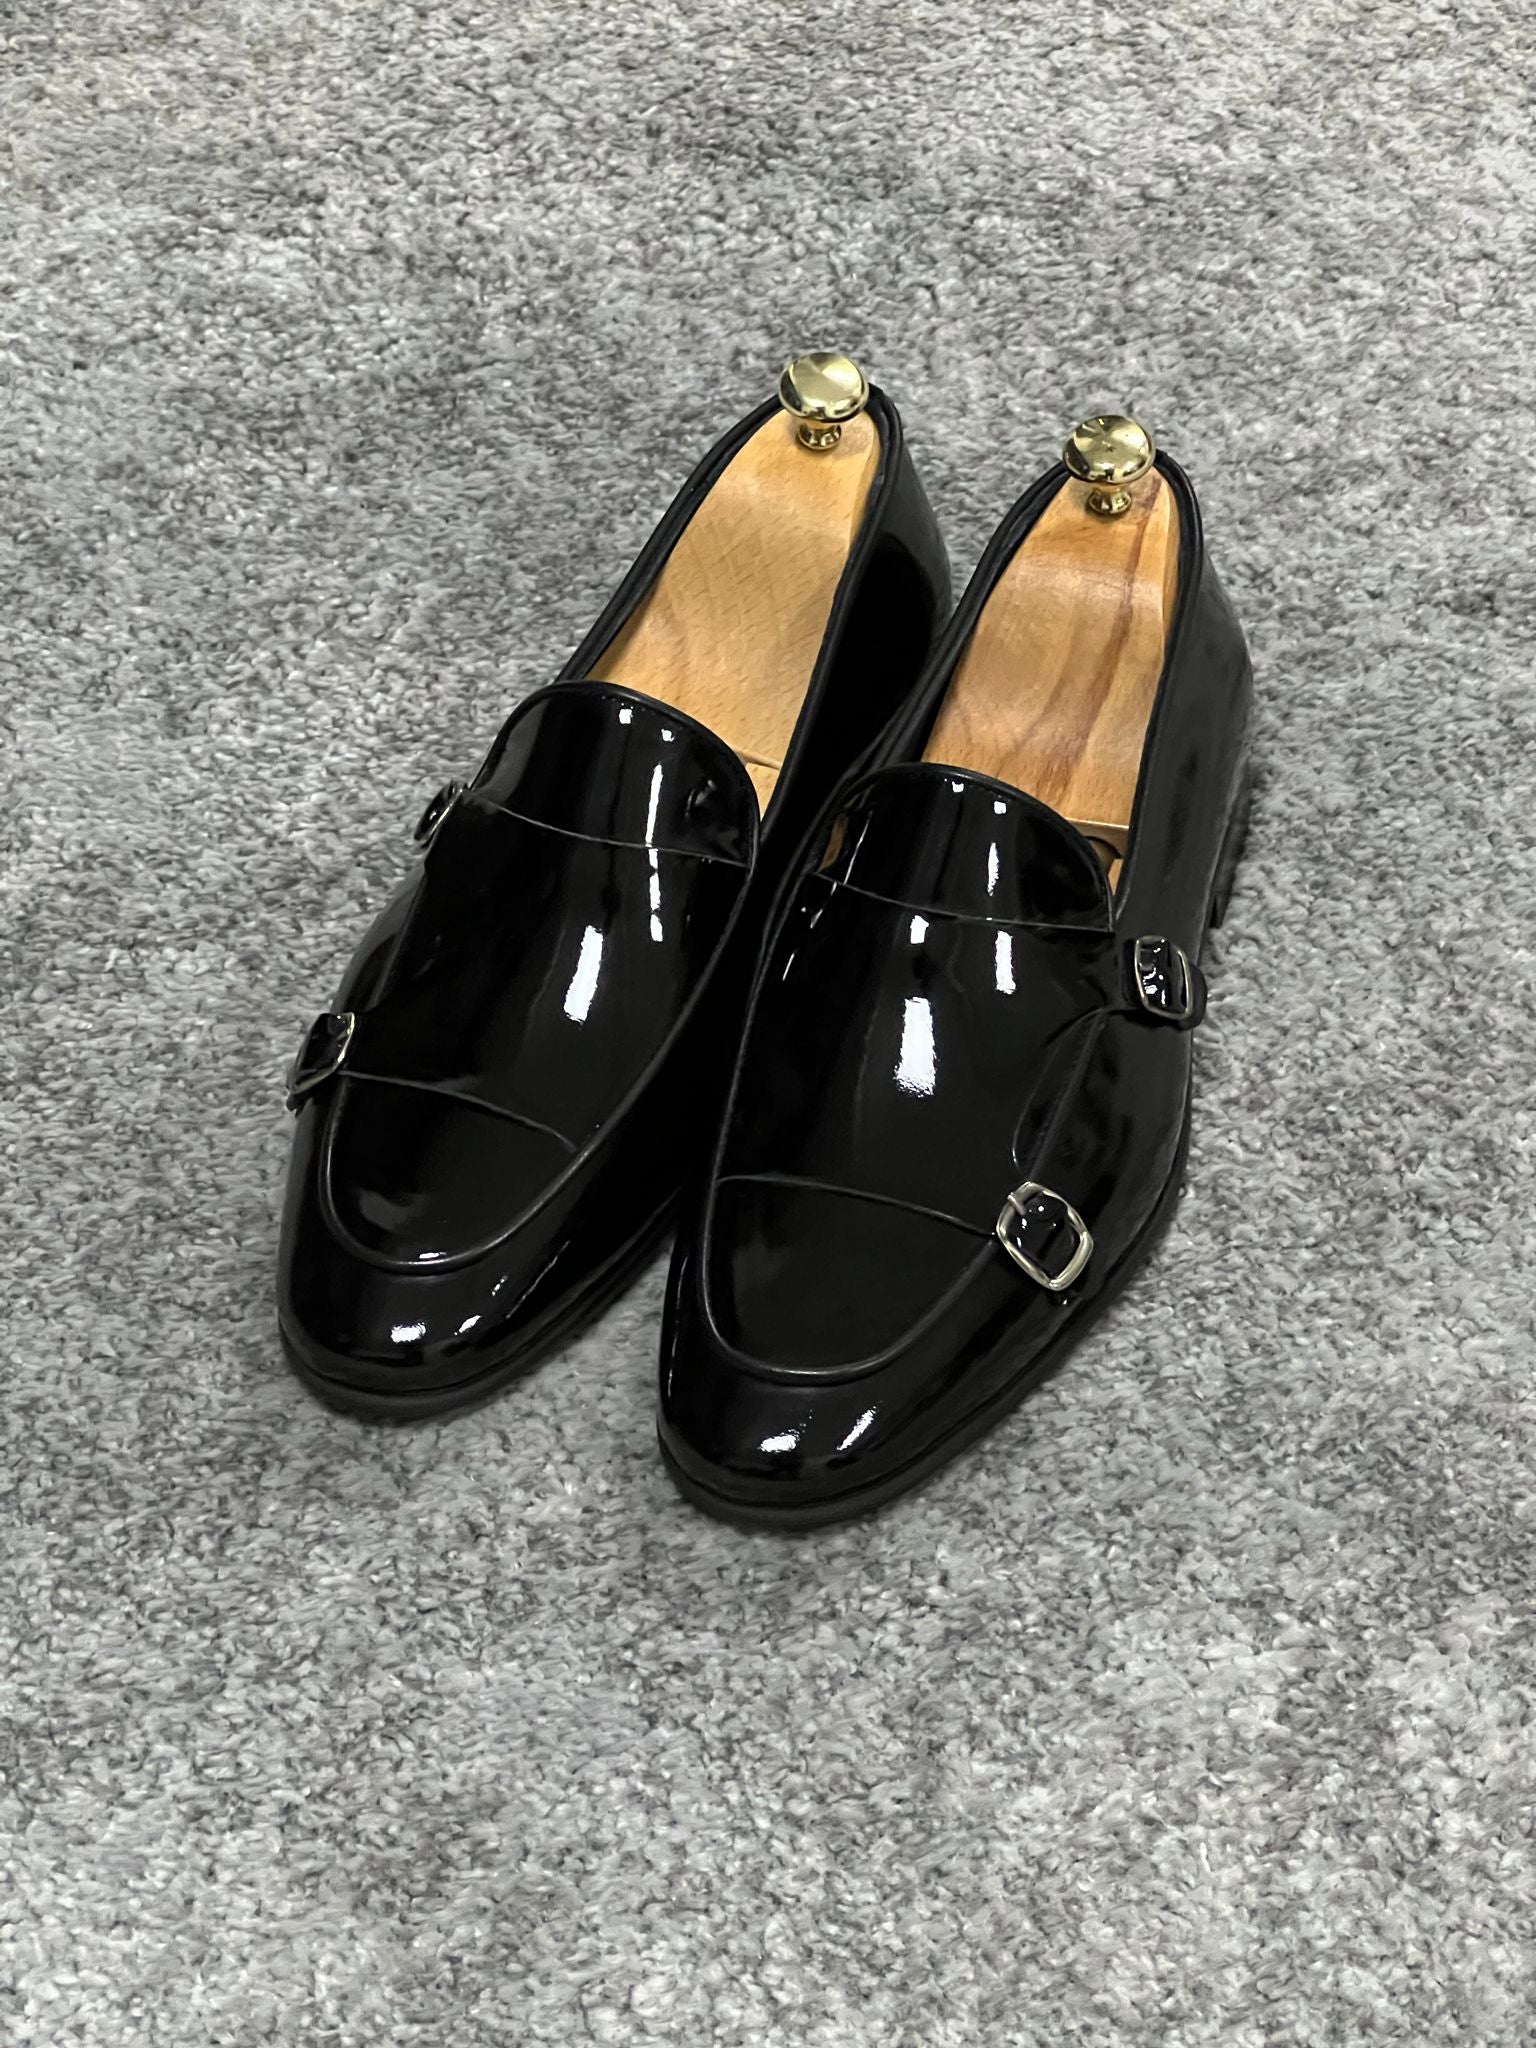 Louis Special Edition Neolite Sole Double Monk Shiney Leather Black Shoes